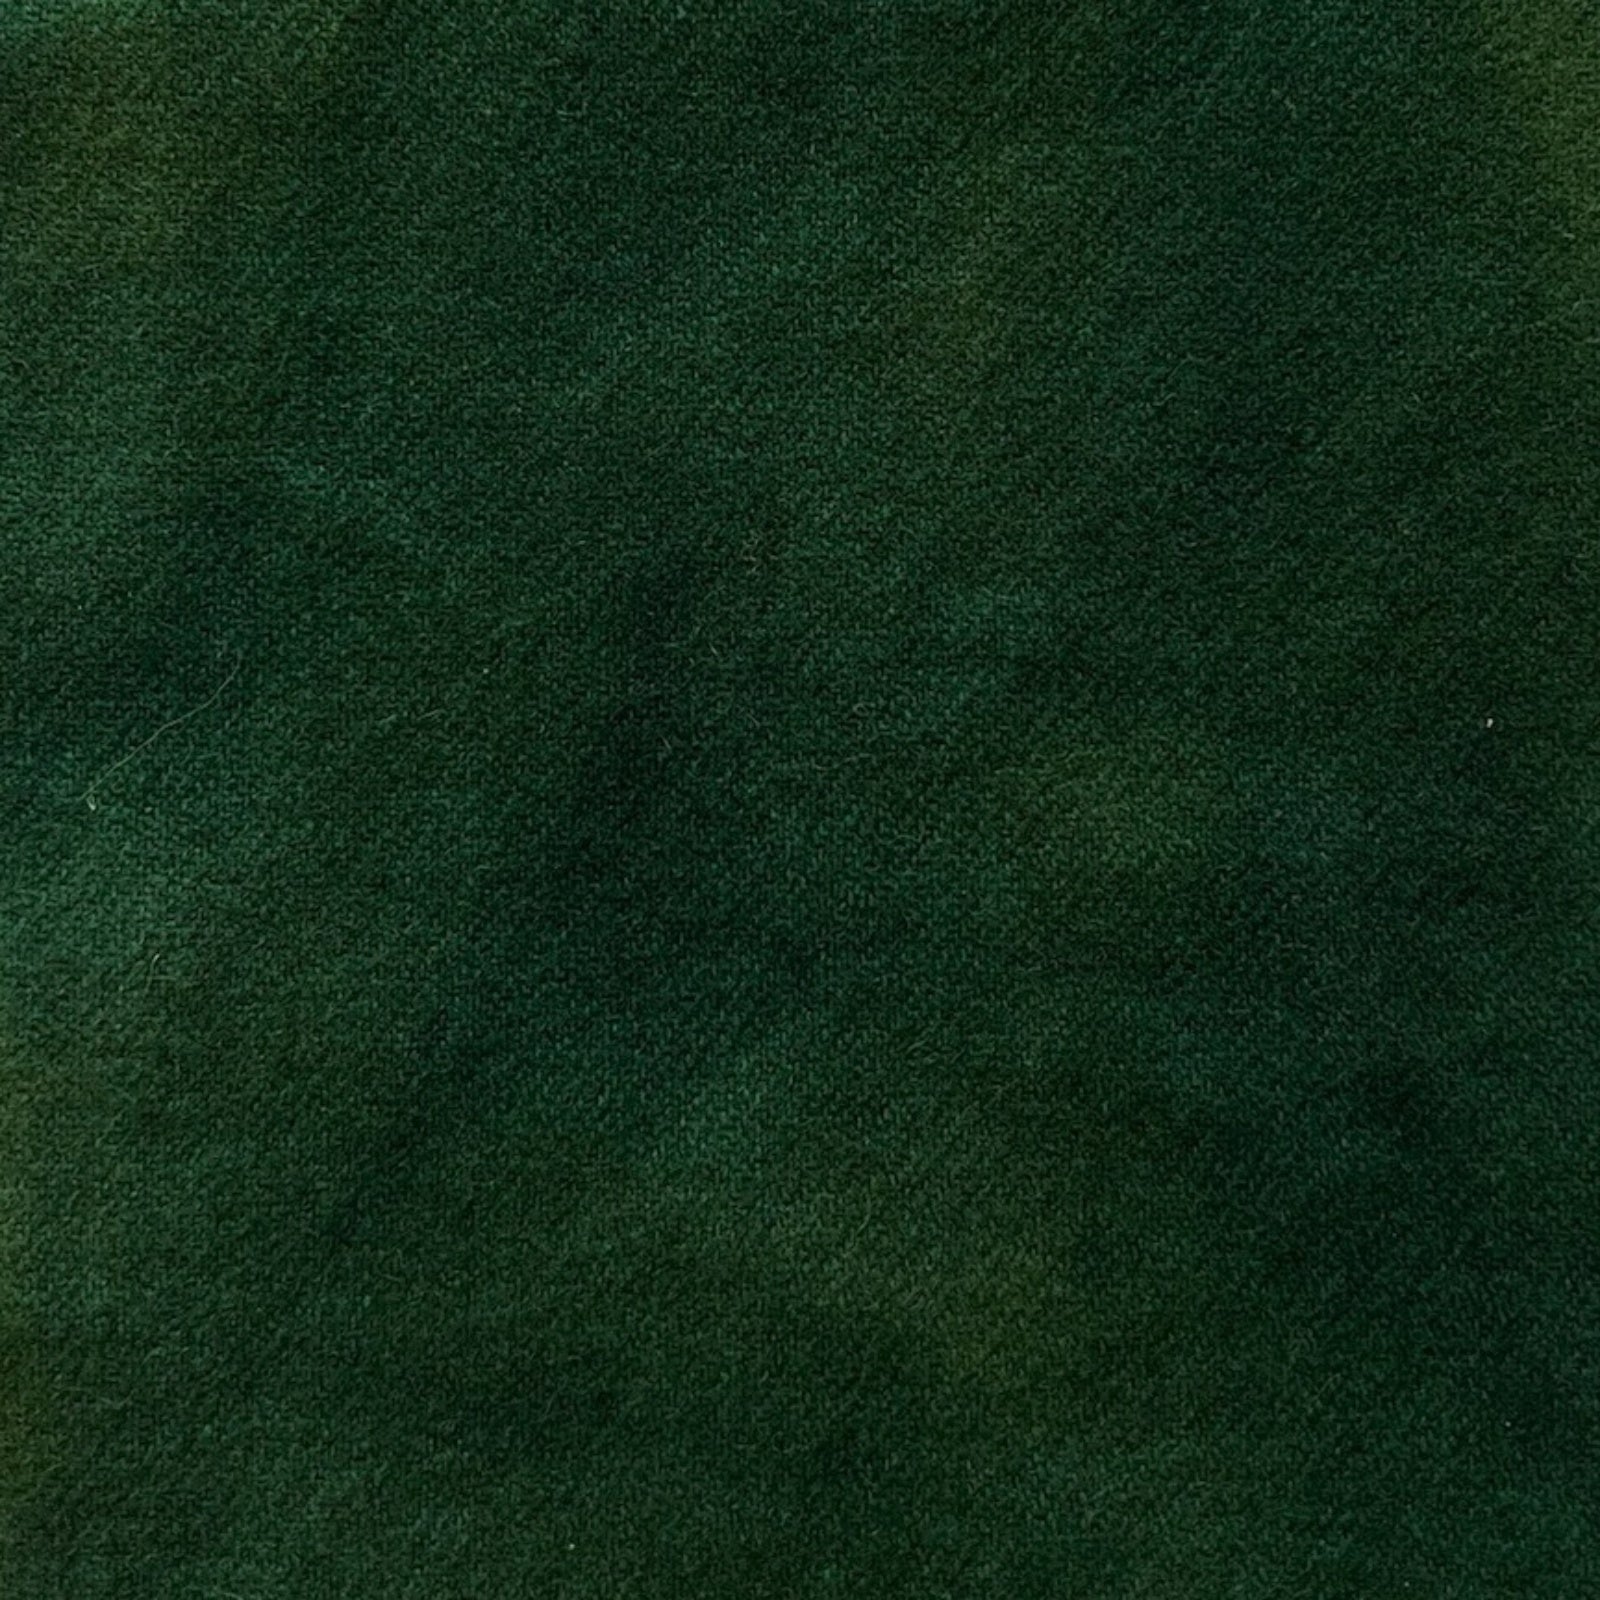 Emerald - Colorama Hand Dyed Wool - Offered by HoneyBee Hive Rug Hooking